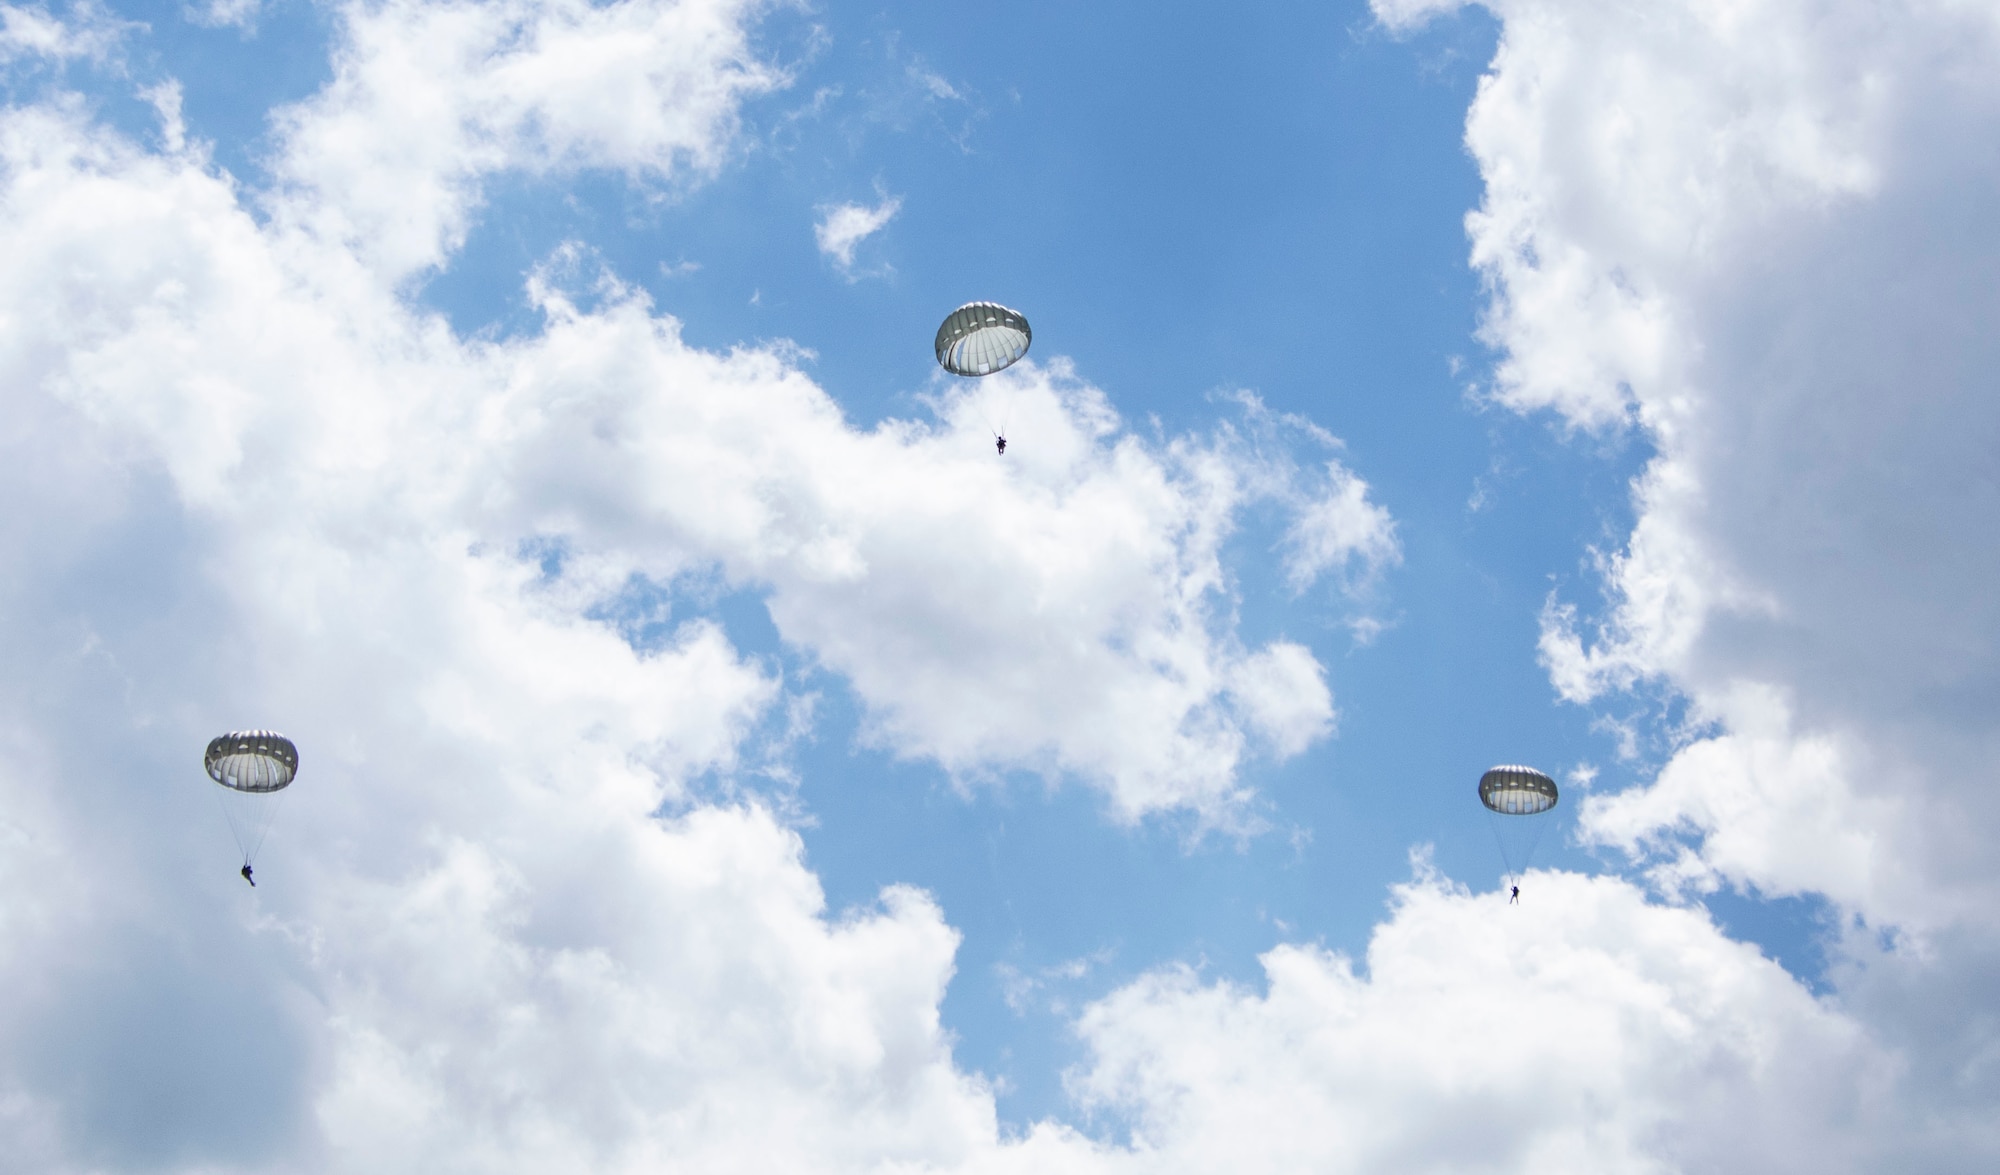 Three Airmen from the 14th Air Support Operations Squadron, United State Air Force, parachute over the a field at Fort Indiantown Gap, Pa. The airmen jumped from a Pennsylvania Army National Guard CH-47 Chinook during joint training on May 17, 2022.